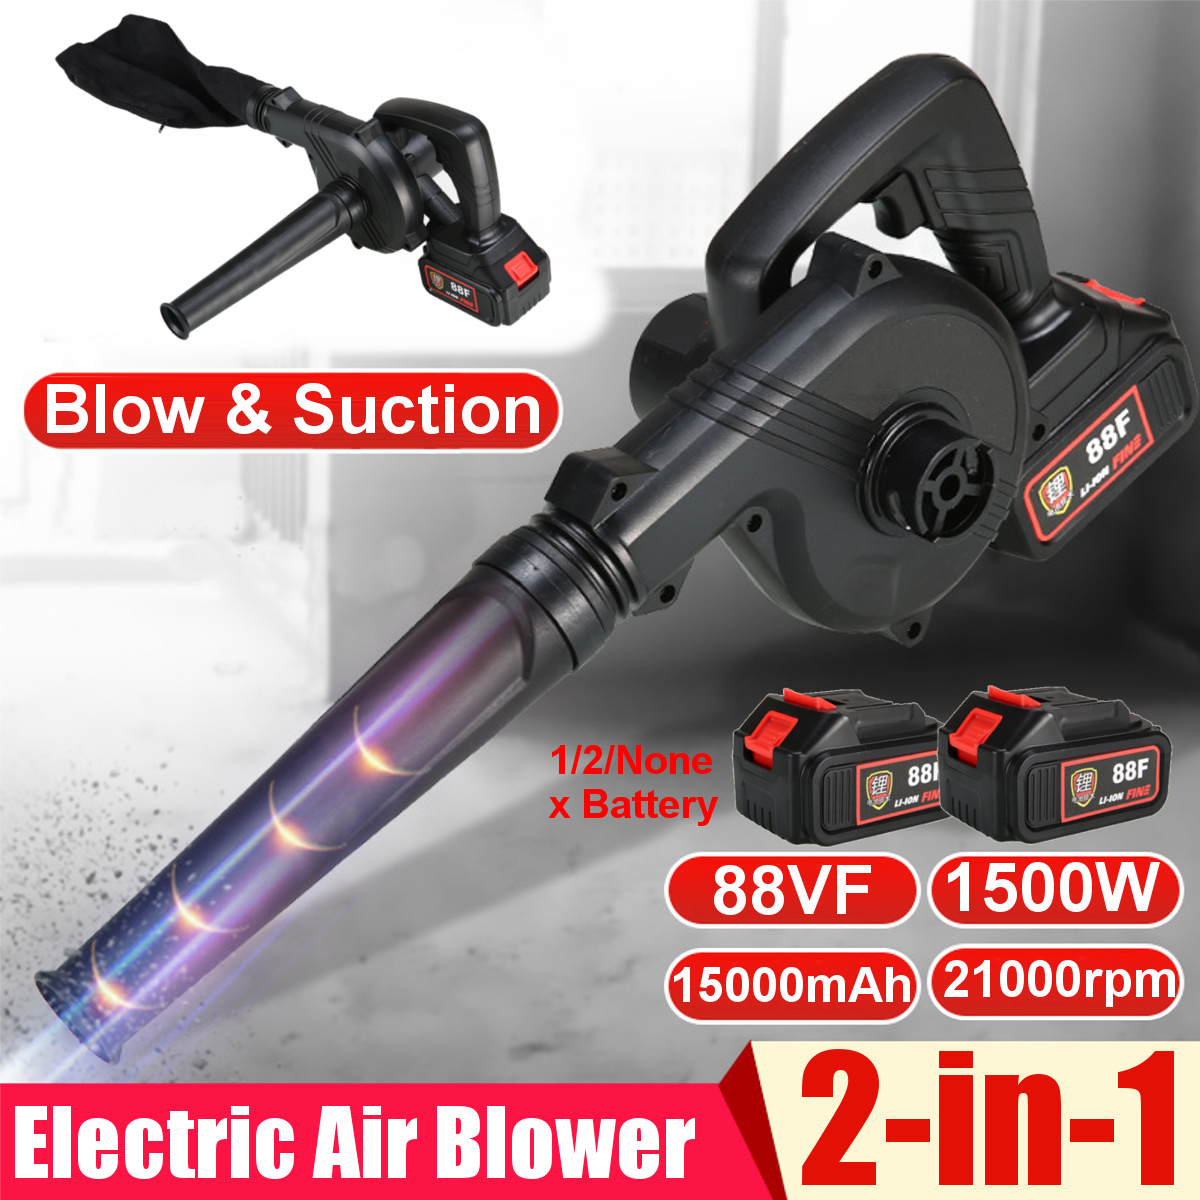 88VF-1500W-2-in-1-Electric-Air-Blower-Wireless-Vehicle-Computer-Vacuum-Dust-Collector-Leaf-Cleaner-W-1861025-2